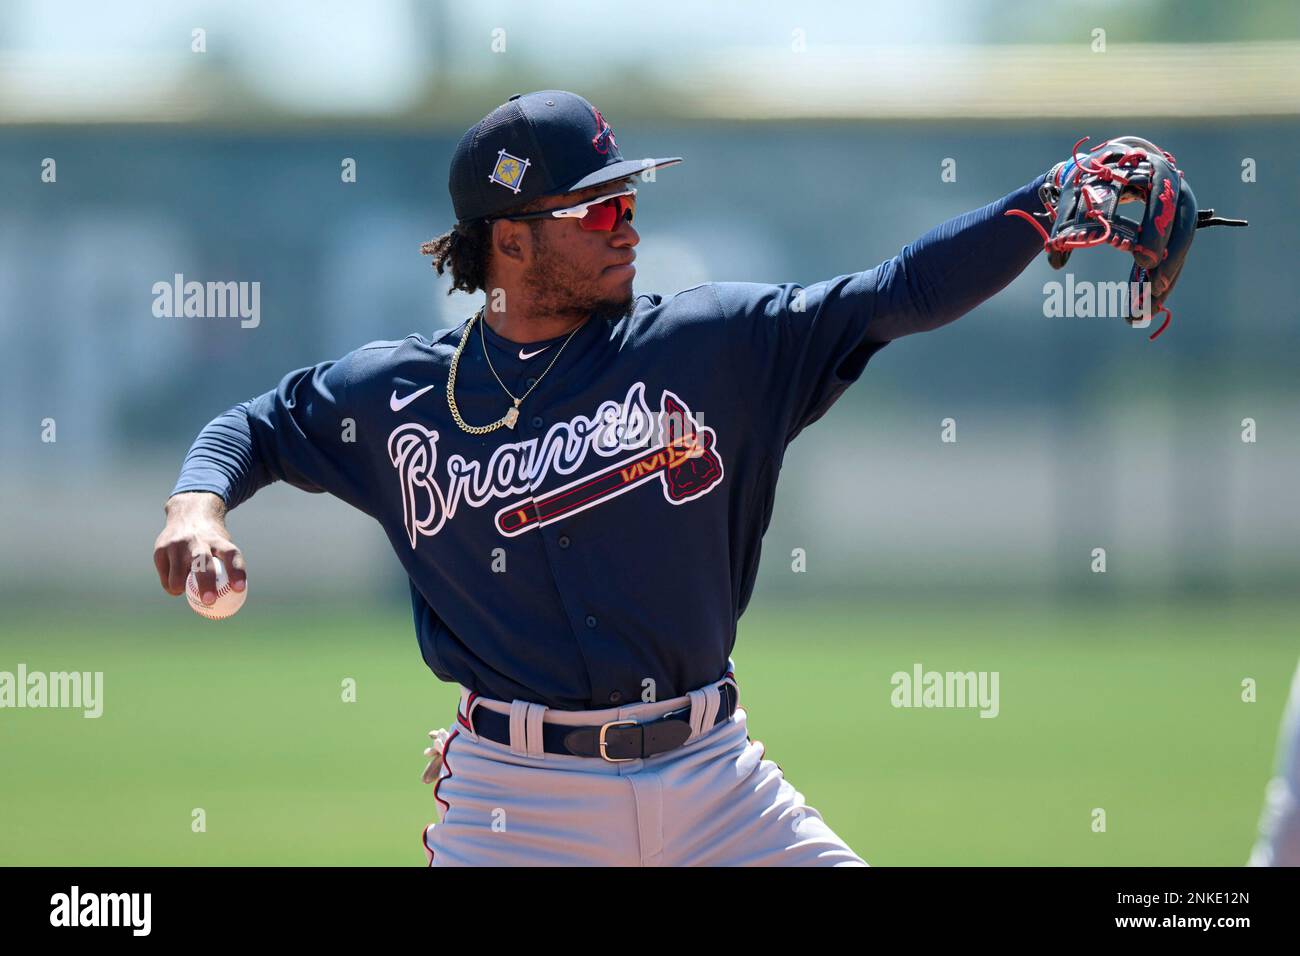 Atlanta Braves shortstop Ambioris Tavarez (32) throws to first base during a MiLB Spring Training game against the Boston Red Sox on March 21, 2022 at CoolToday Park Complex in North Port,